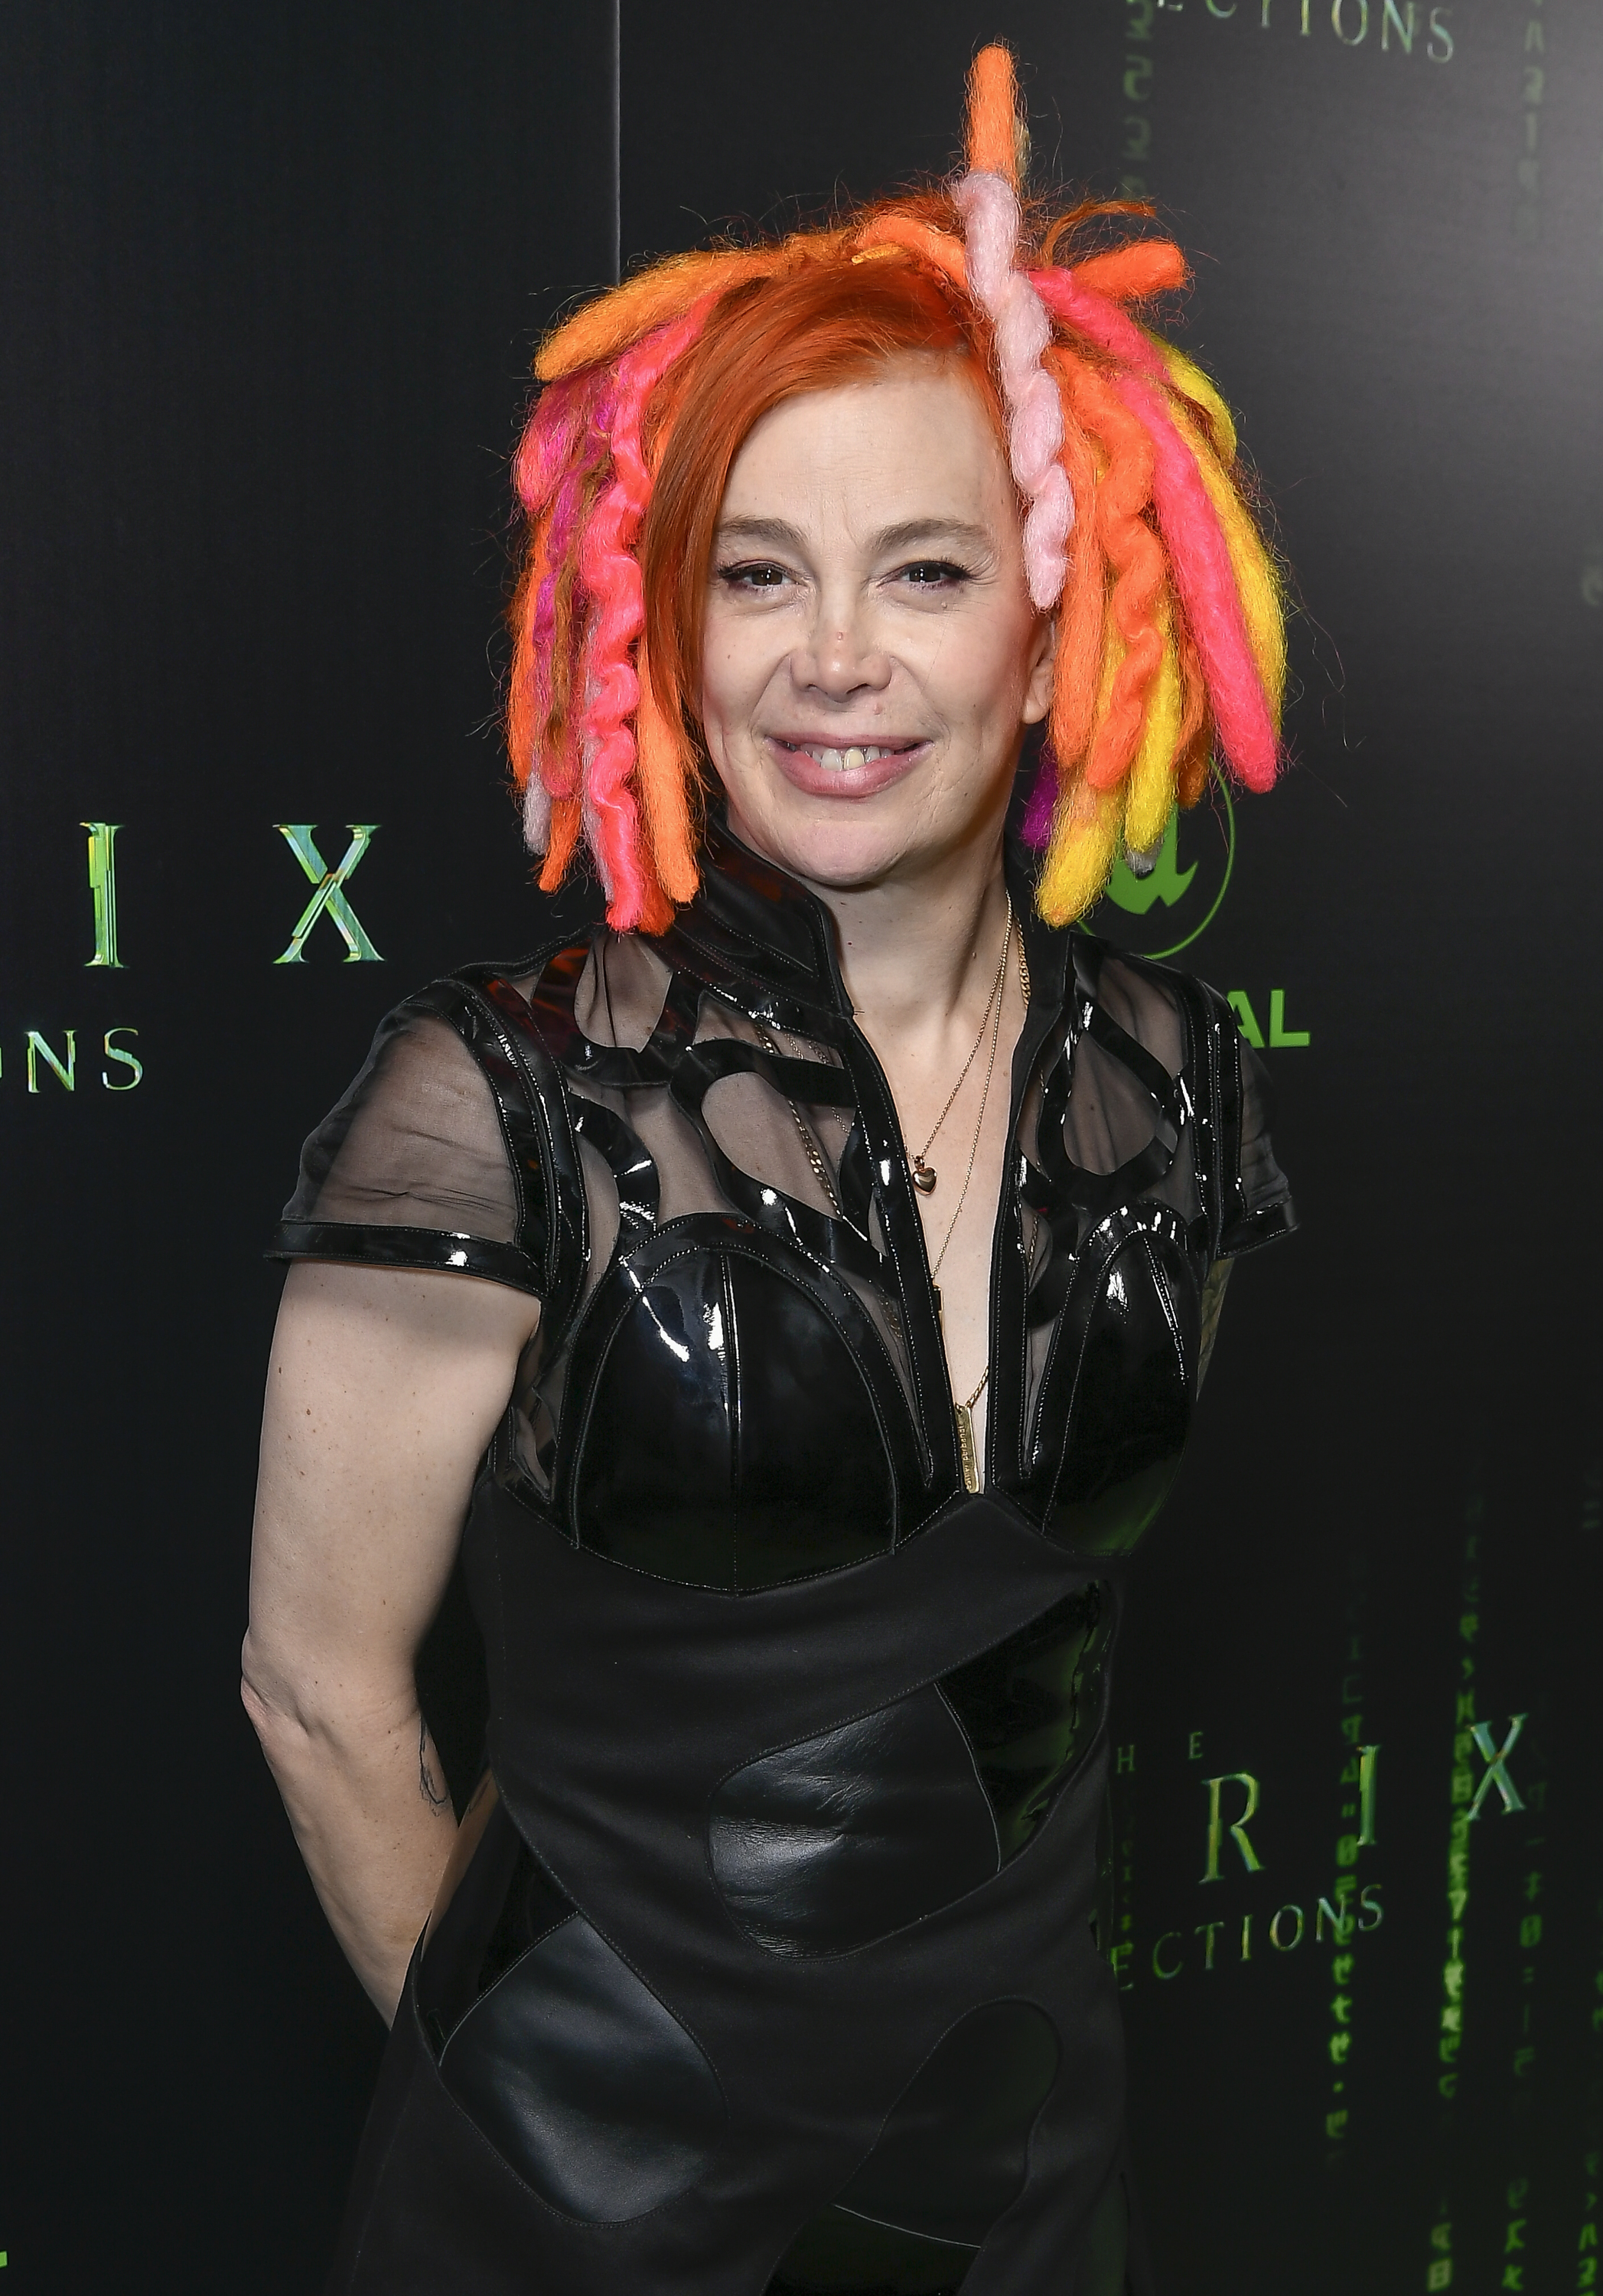 Lana Wachowski attends "The Matrix Resurrections" red carpet U.S. premiere screening on December 18, 2021 in San Francisco, California. | Source: Getty Images